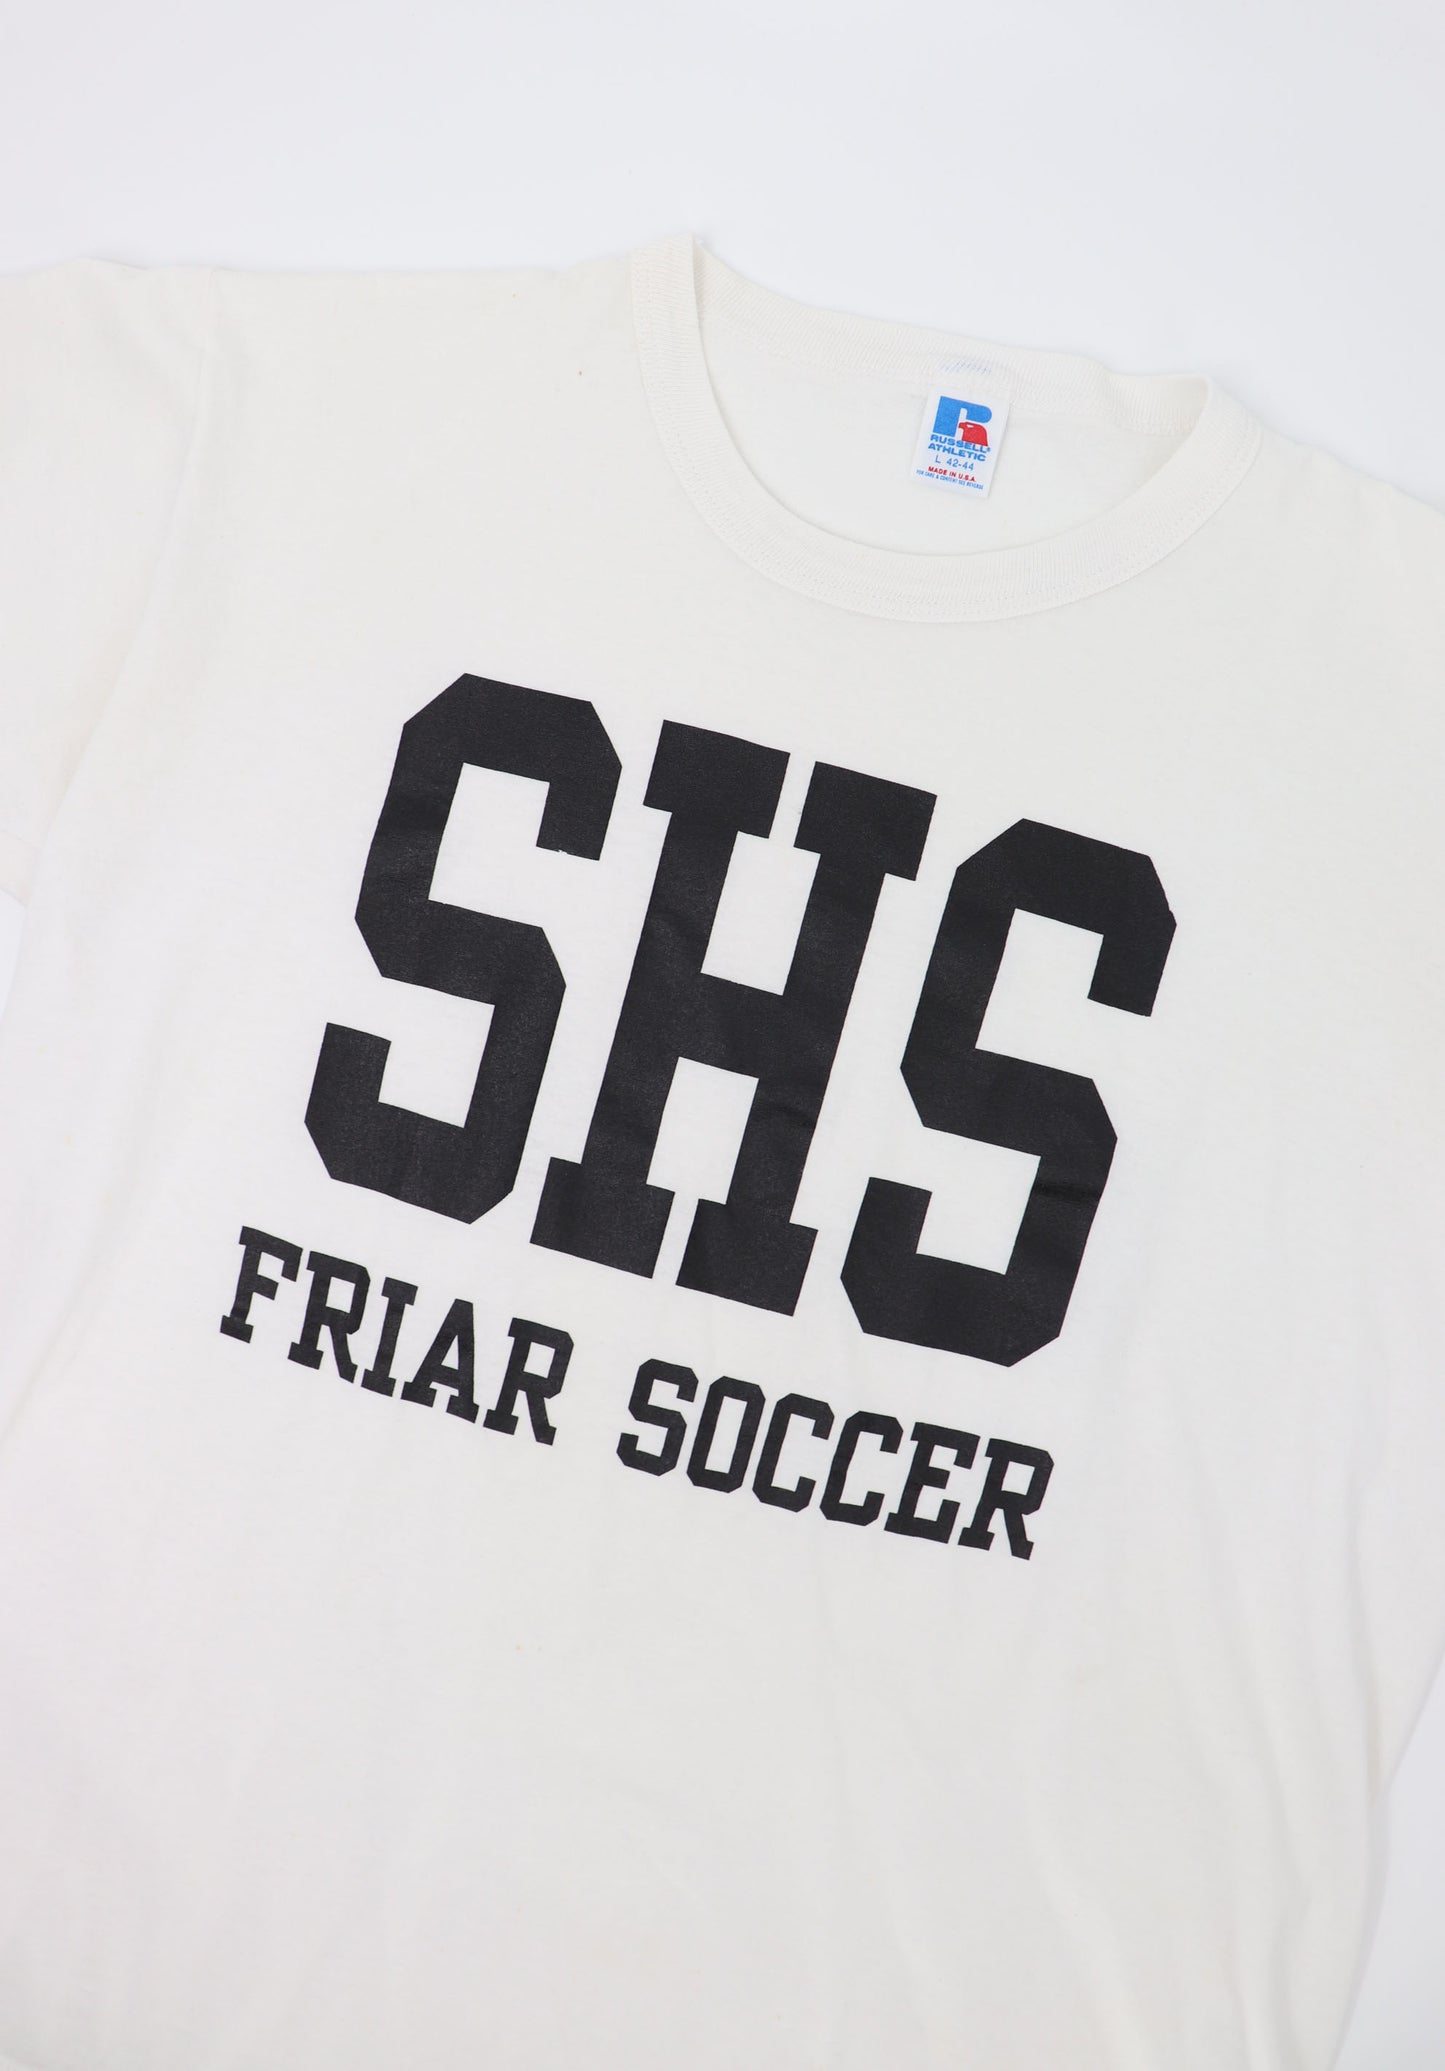 FRIAR SOCCER 1990s TEE MADE IN USA